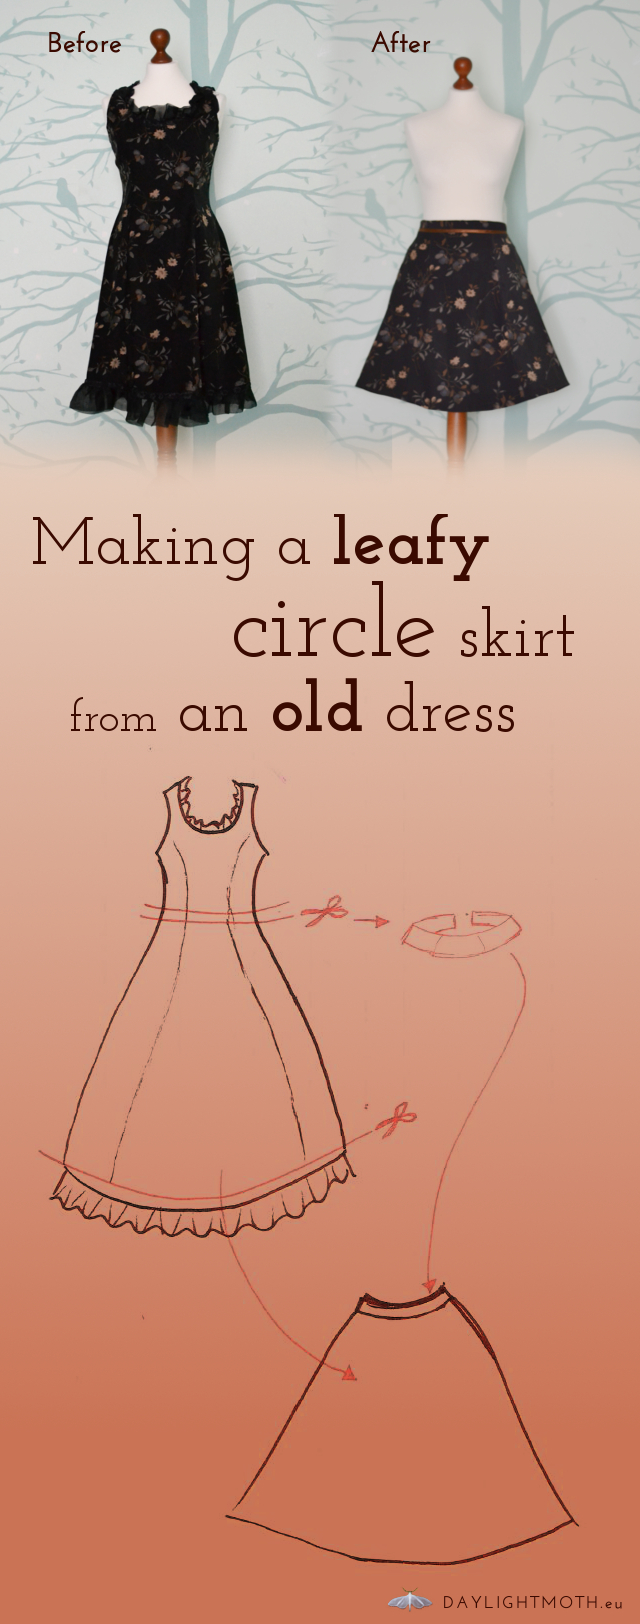 This is a very easy and uncomplicated way of making a skirt from a dress. and creating a new piece of clothing from somthing old #upcycling